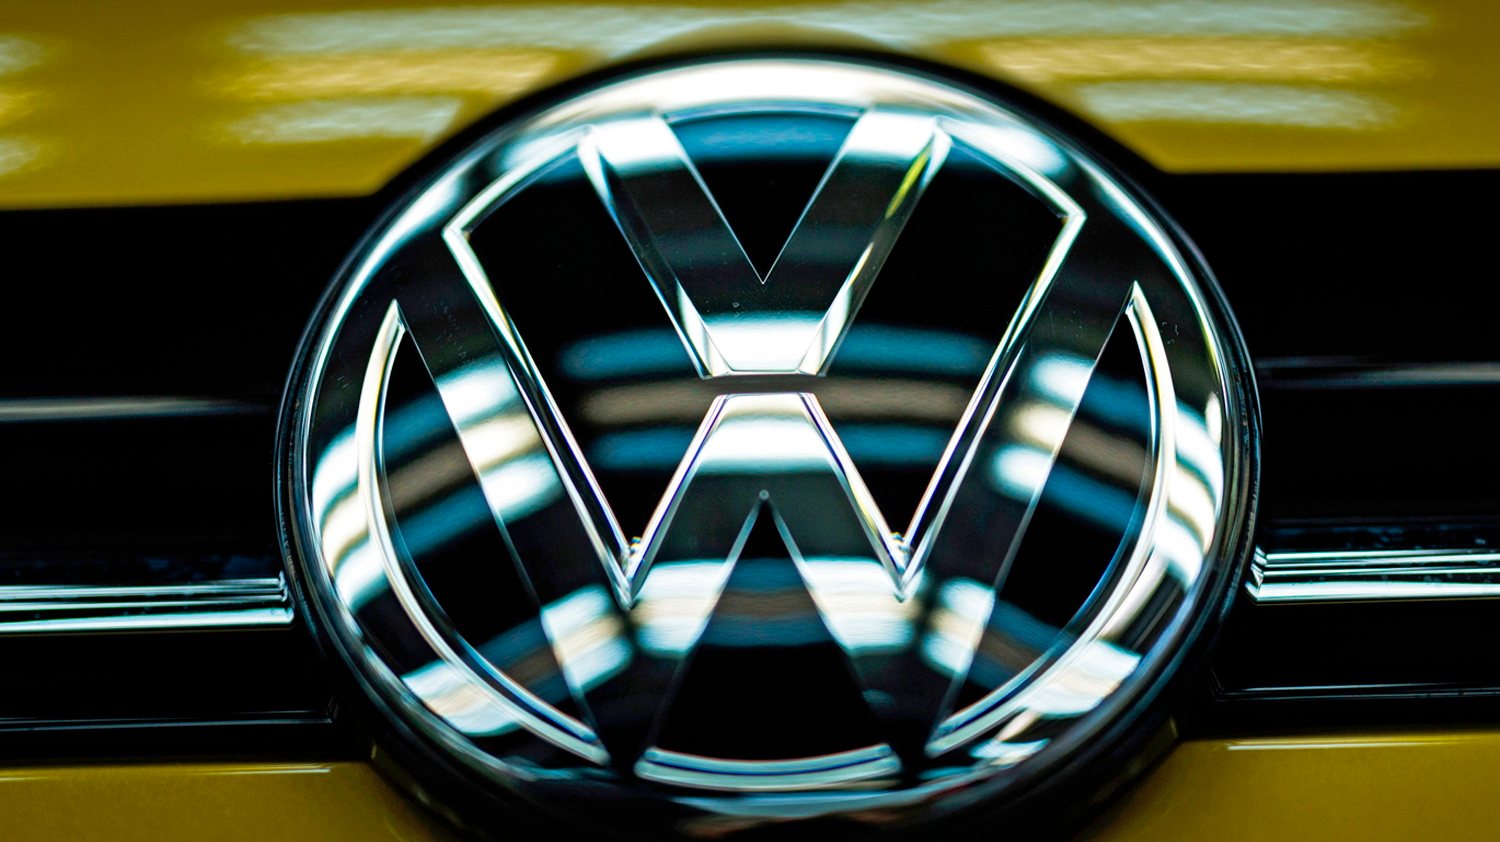 epa07486362 (FILE) - A Volkswagen (VW) logo pictured on the bonnet of a car in the quality check in the production line at the Volkswagen (VW) parent plant in Wolfsburg, Germany, 09 March 2017 (reissued 05 April 2019). Media reports on 05 April 2019 state the EU commission regulators in a statement have charged German carmakers Daimler, Volkswagen and BMW of collusion in the area of emissions cleaning technology by &#039;participating in a collusive scheme, in breach of EU competition rules, to limit the development and roll-out of emission-cleaning technology for new diesel and petrol passenger cars sold in the European Economic Area&#039;.  EPA/CARSTEN KOALL *** Local Caption *** 53667552